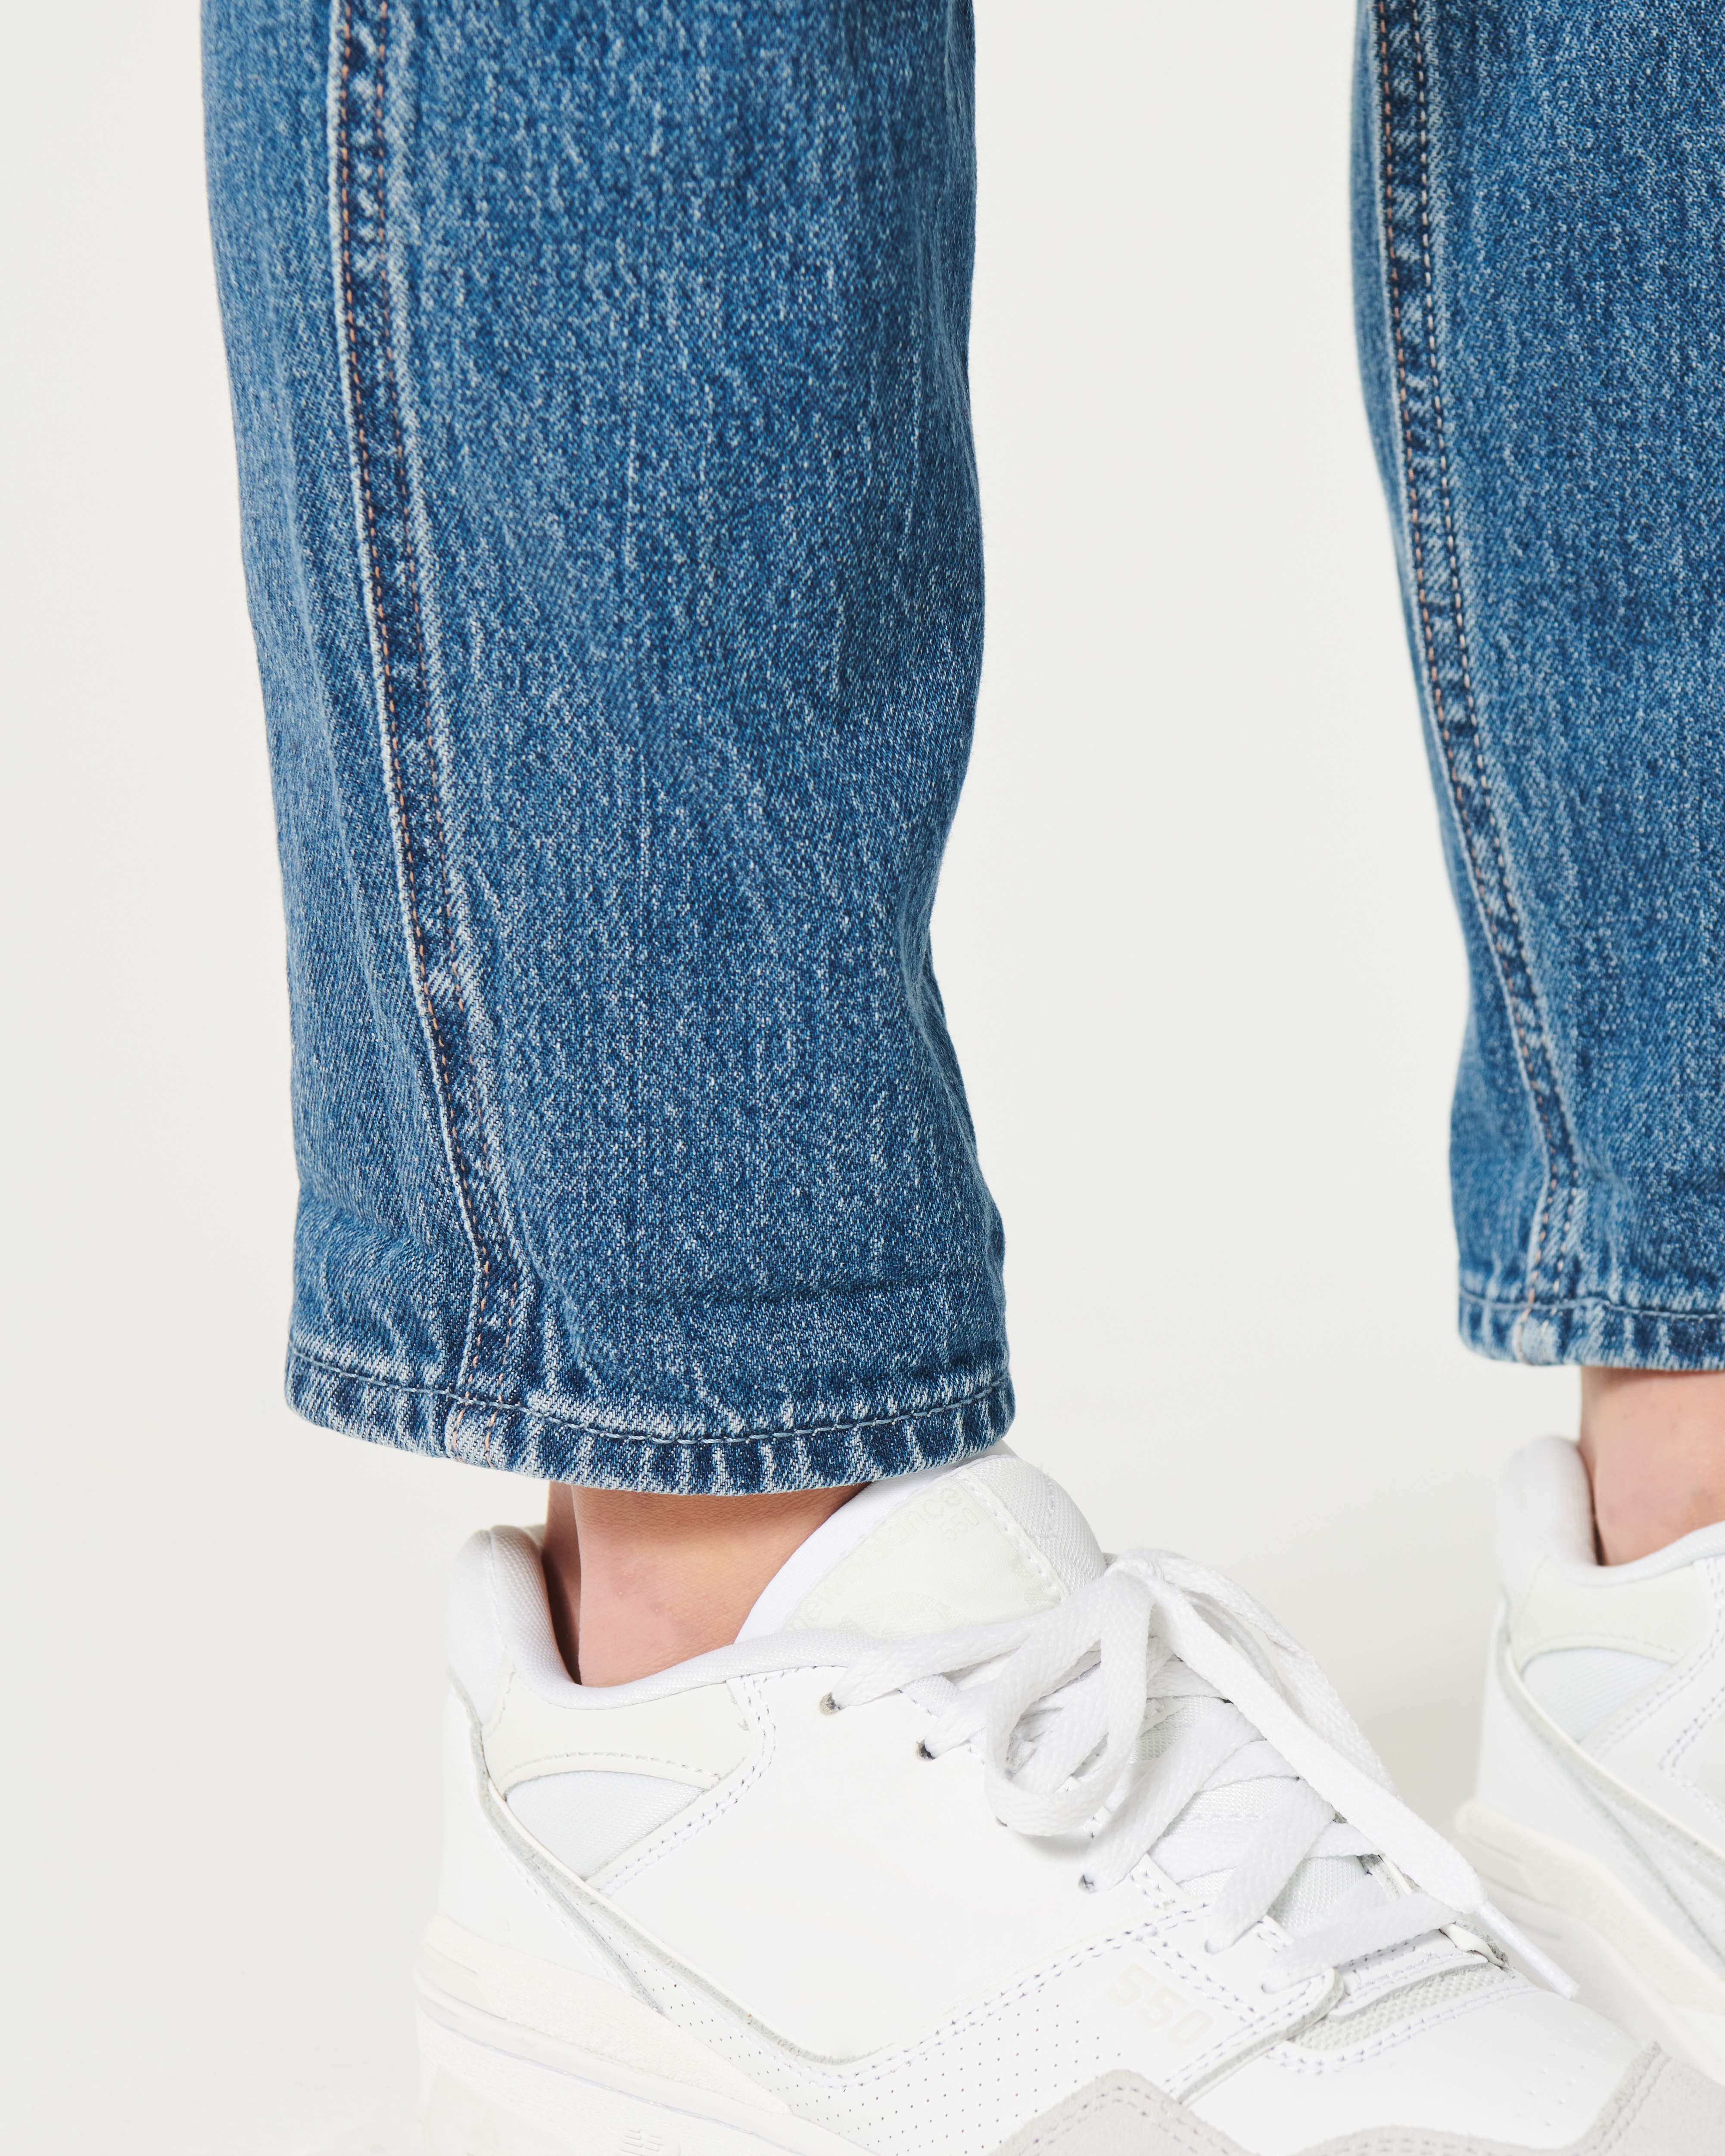 Ultra High-Rise Ripped Medium Wash Mom Jeans